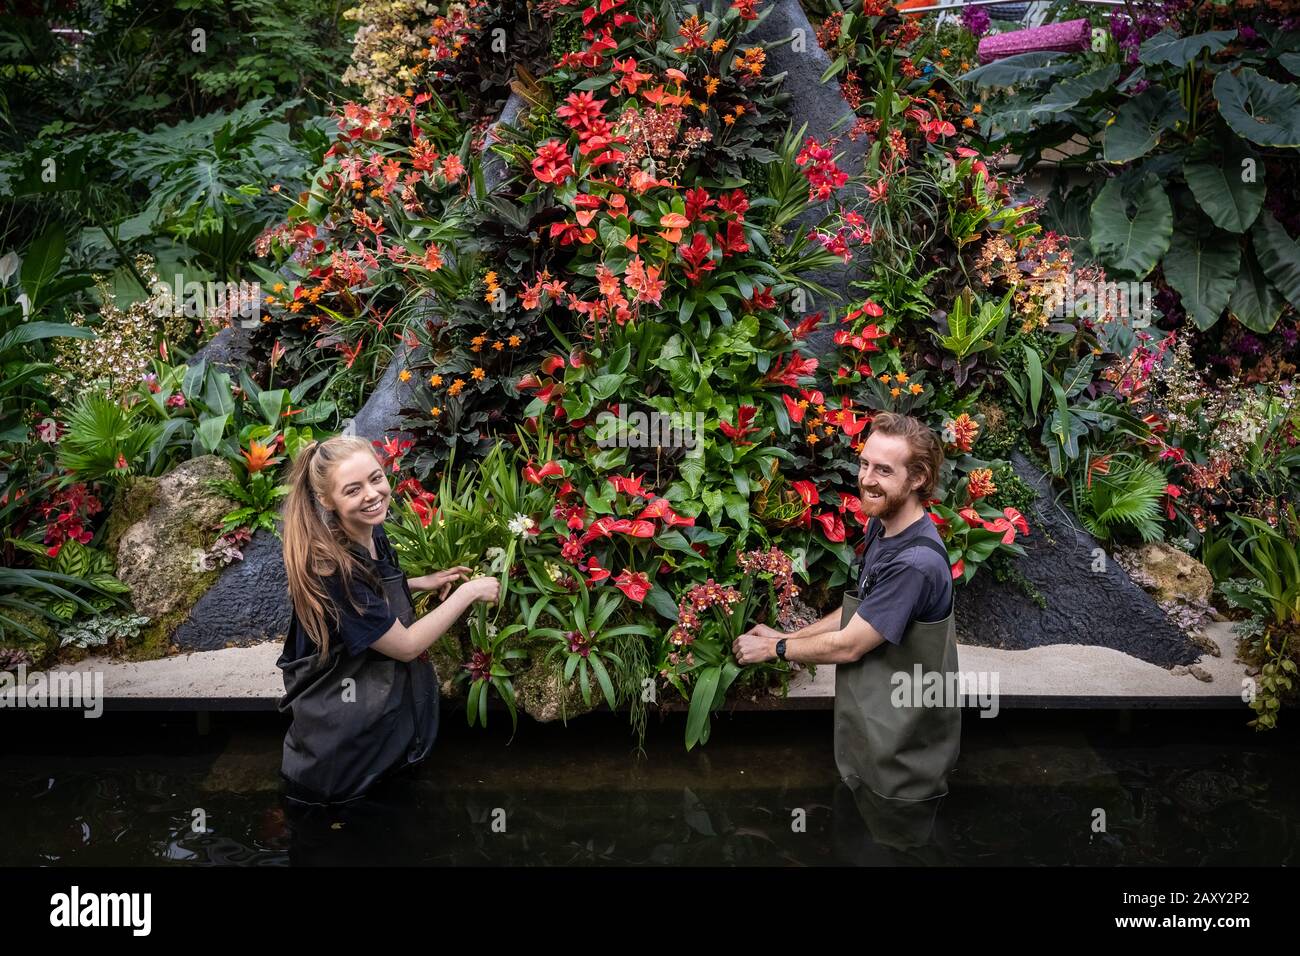 Kew Orchid Festival 2020: Indonesia. Annual orchid festival themed on the country of Indonesia sees over 5,000 colourful orchid and tropical plants. Stock Photo